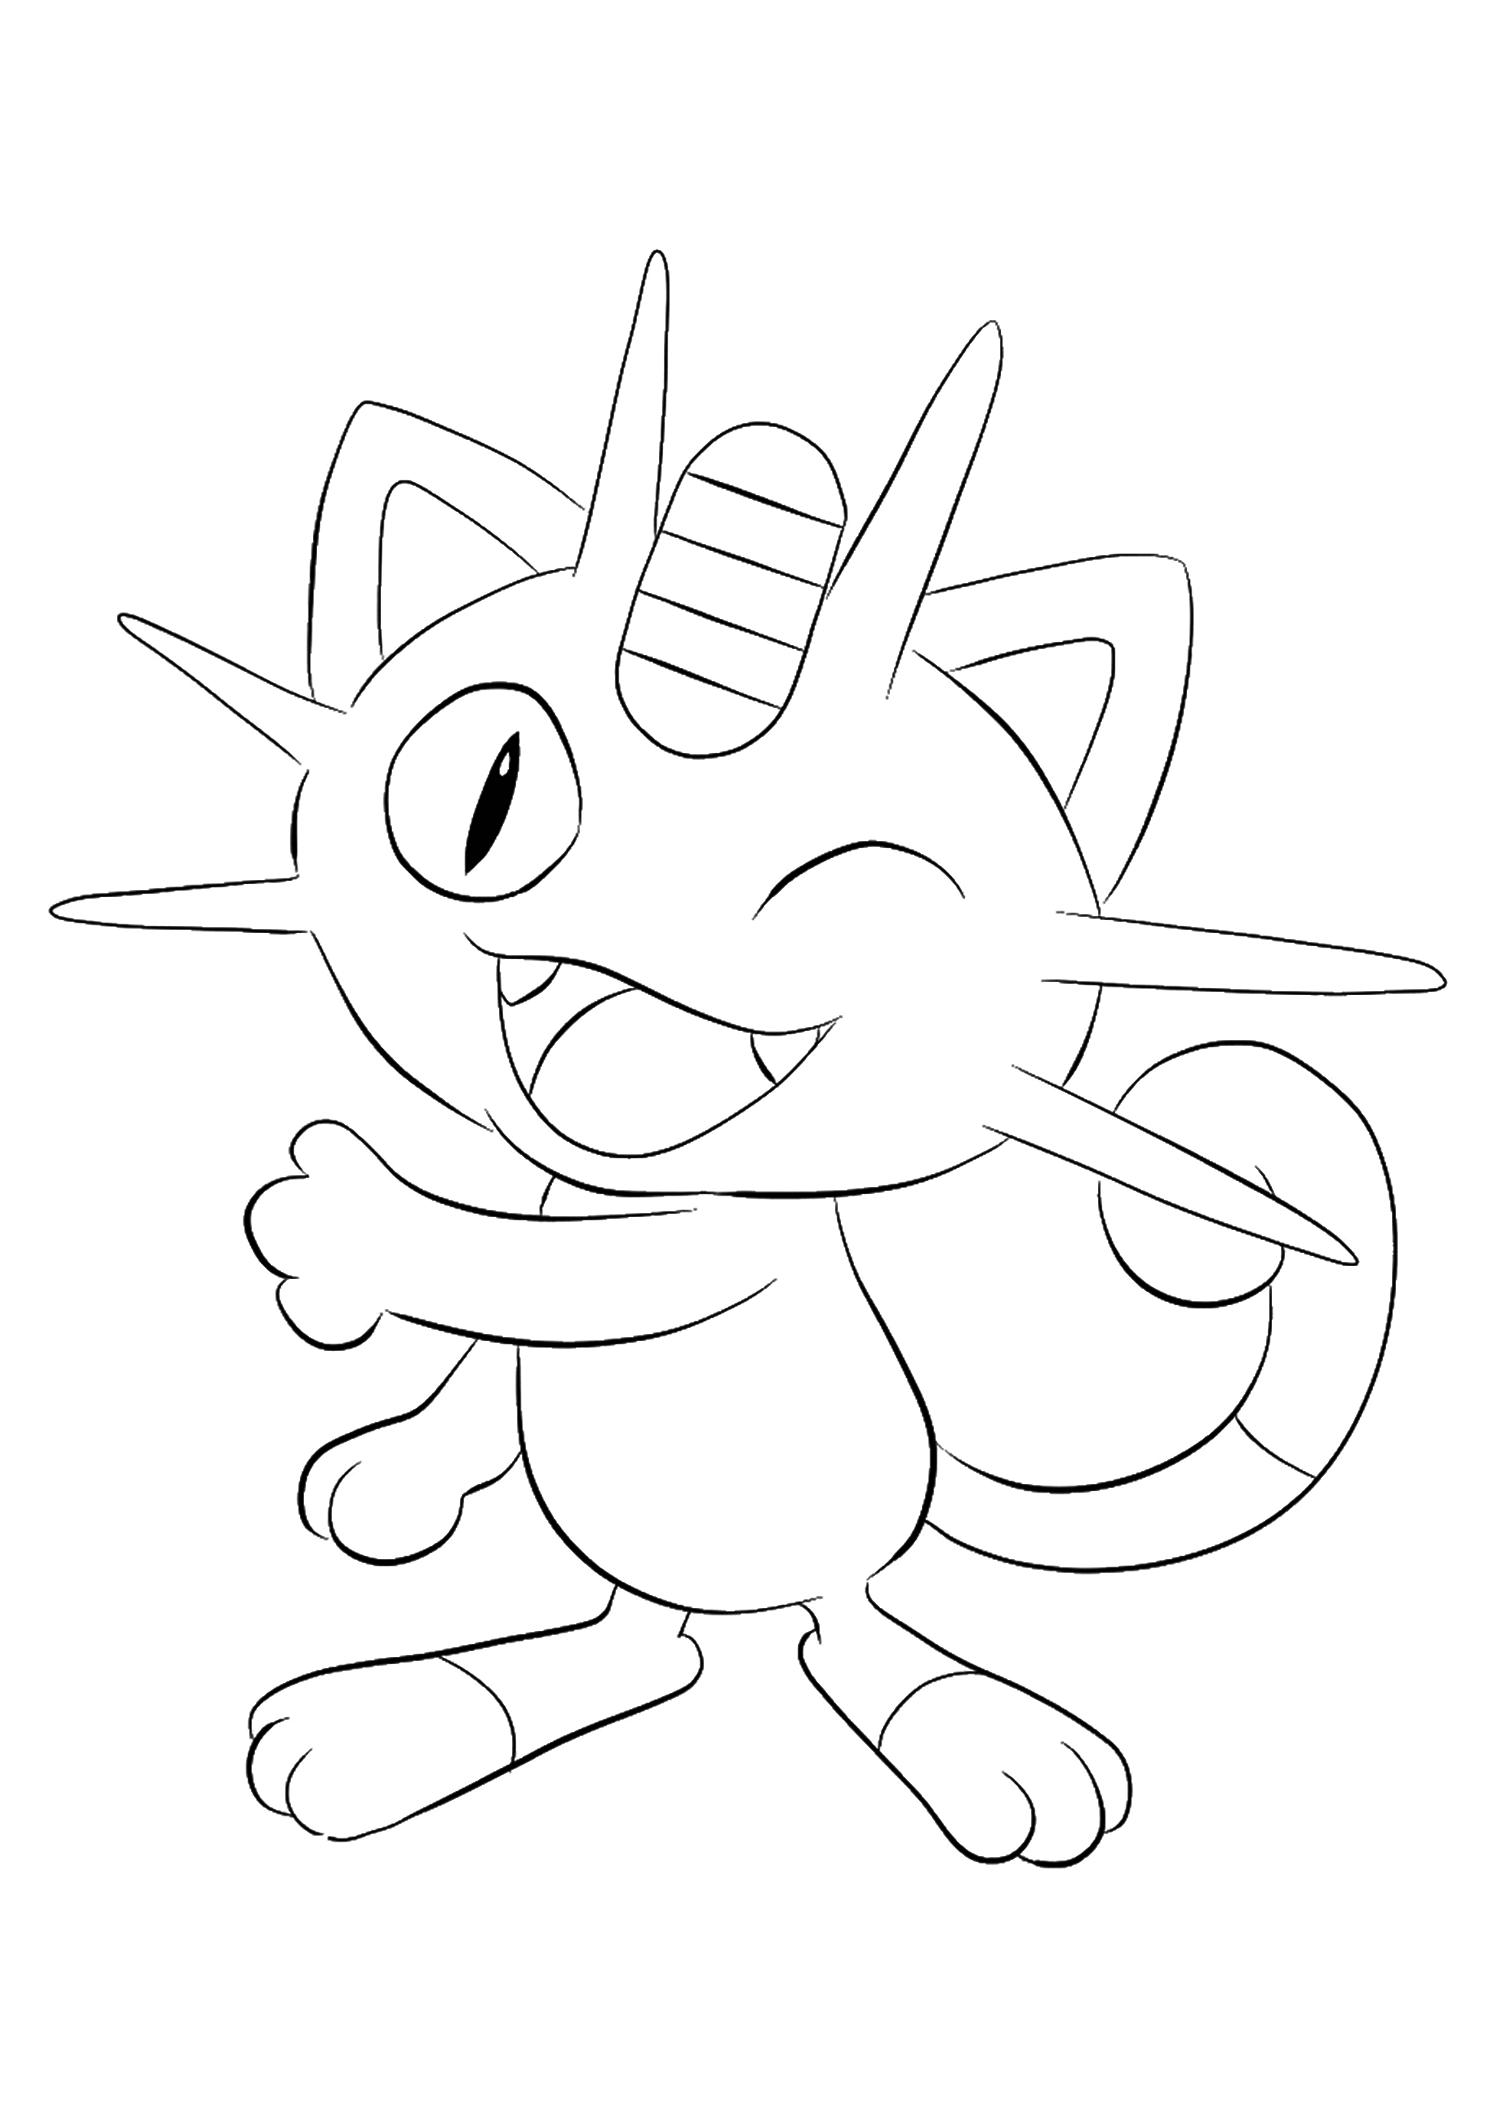 Meowth No.52 : Pokemon Generation I - All Pokemon coloring pages ...